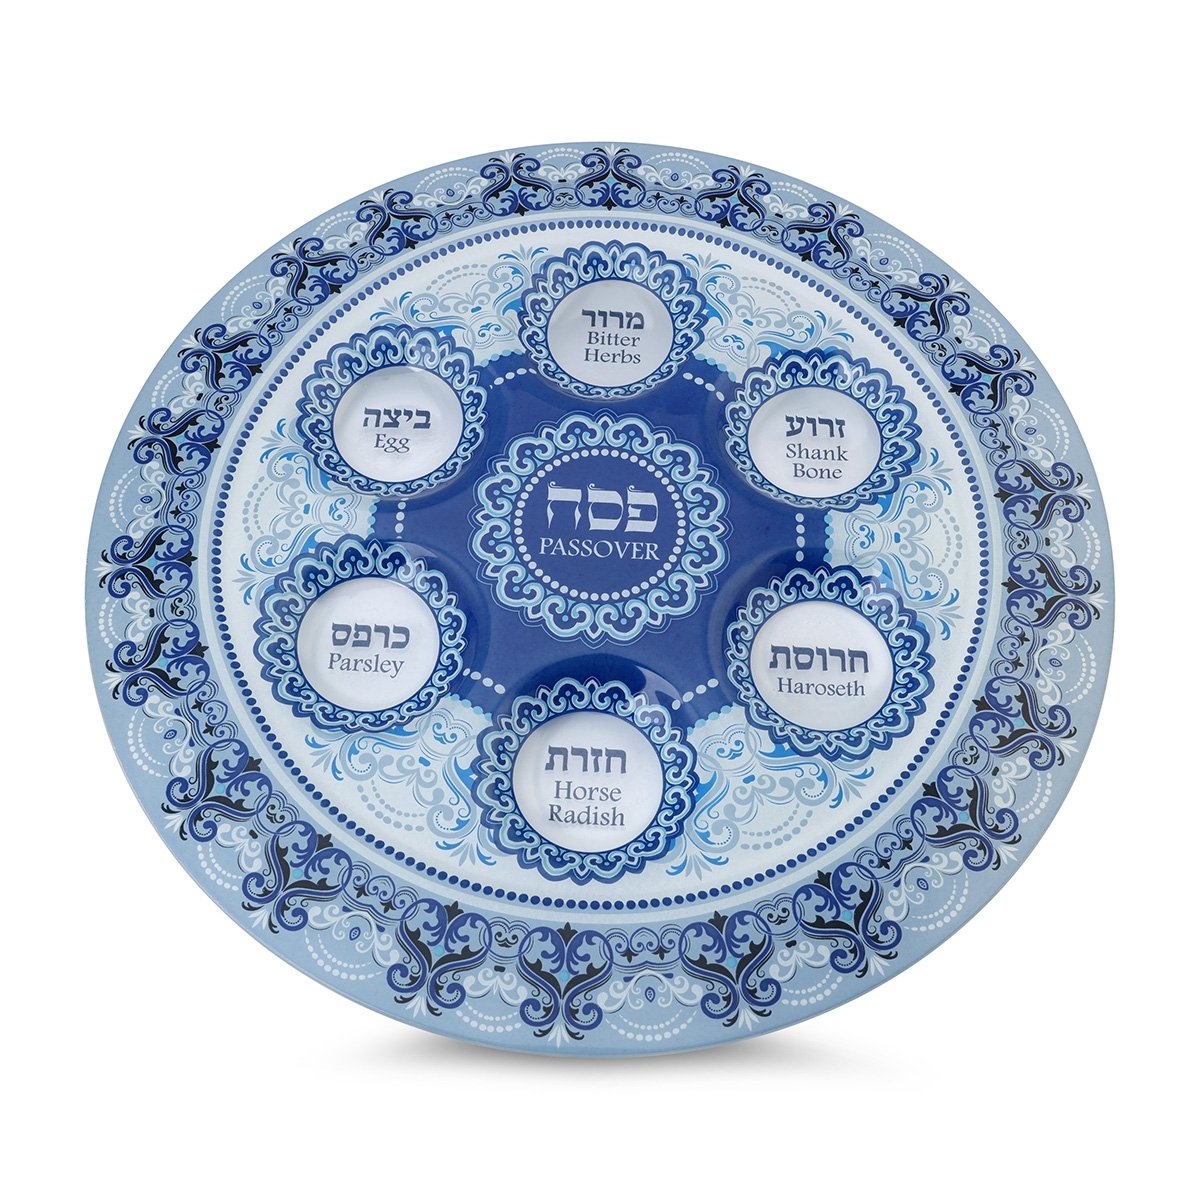 Glass Passover Seder Plate With Blue Floral Design - Hebrew & English - 1